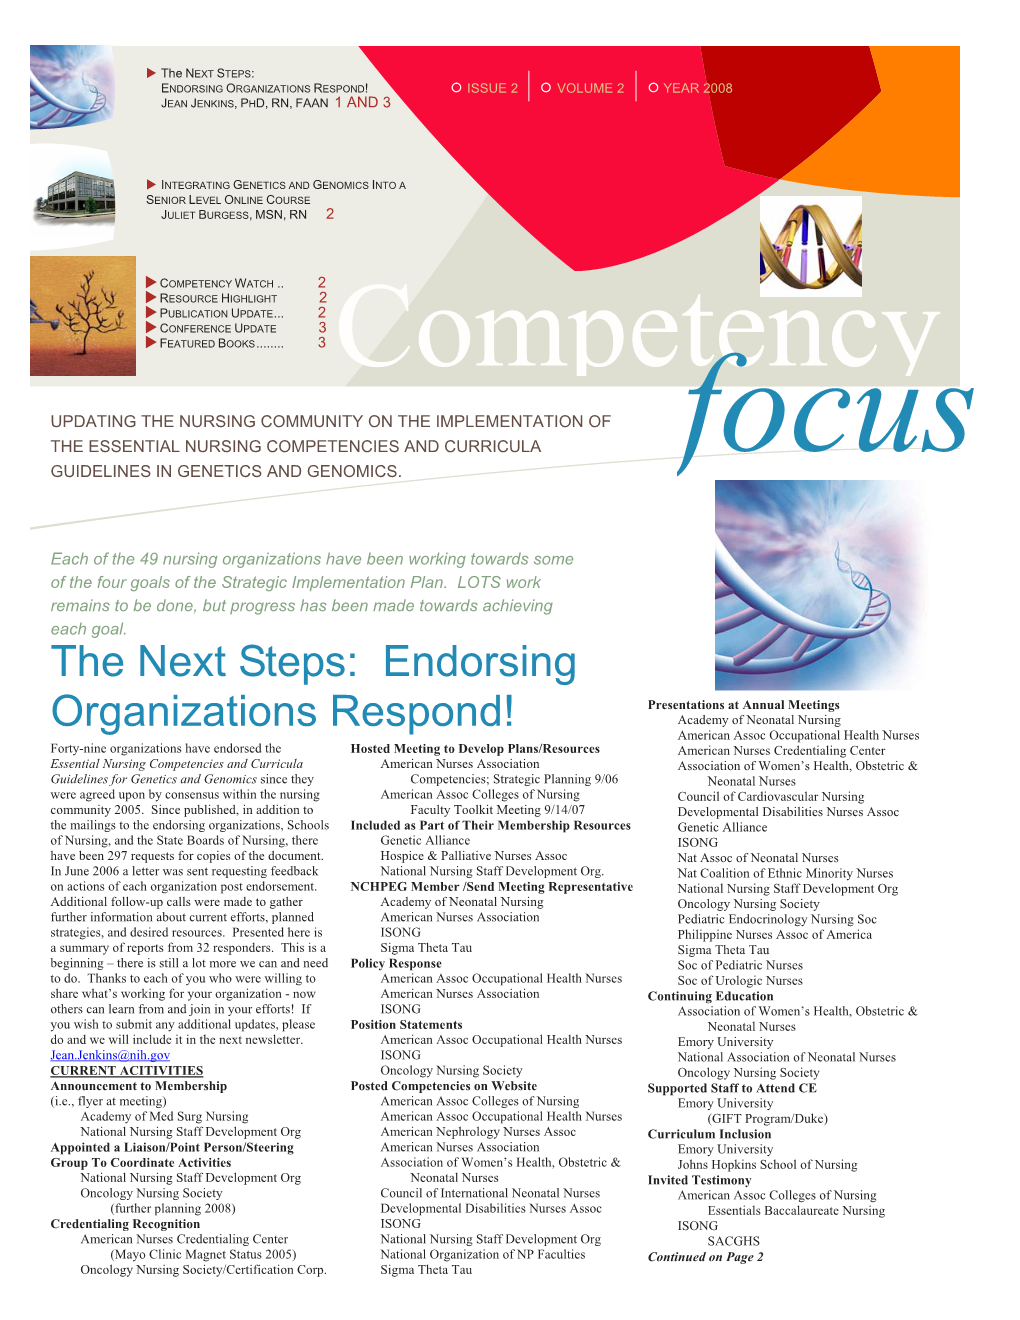 The NEXT STEPS: ENDORSING ORGANIZATIONS RESPOND! ISSUE 2 VOLUME 2 YEAR 2008 JEAN JENKINS, PHD, RN, FAAN 1 and 3